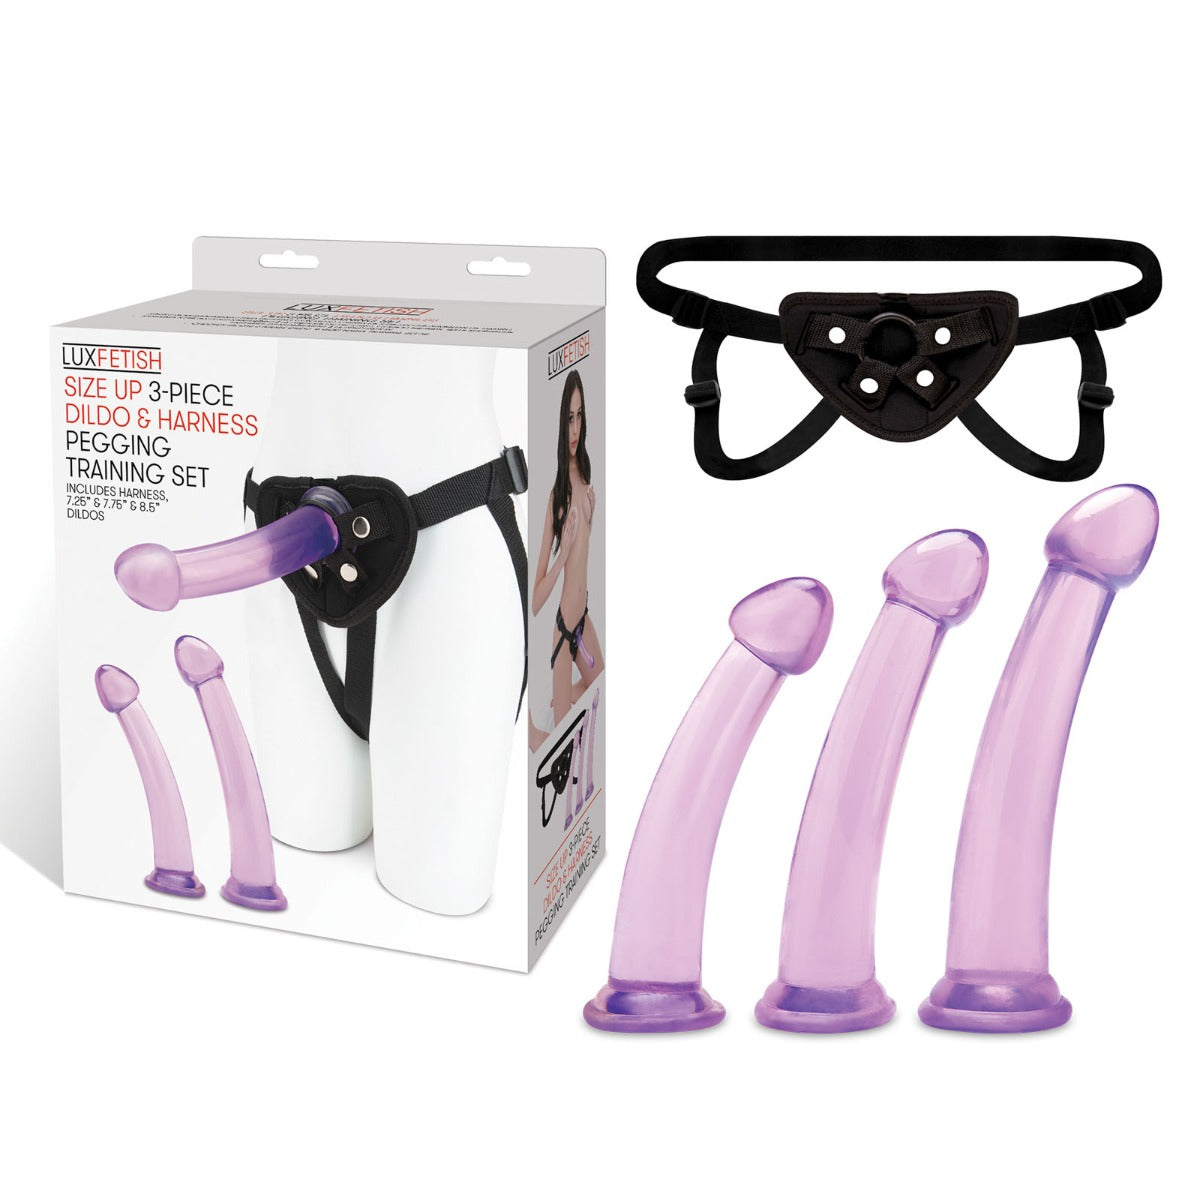 Lux Fetish | SIZE UP 4-PIECE DILDO AND HARNESS PEGGING TRAINING SET